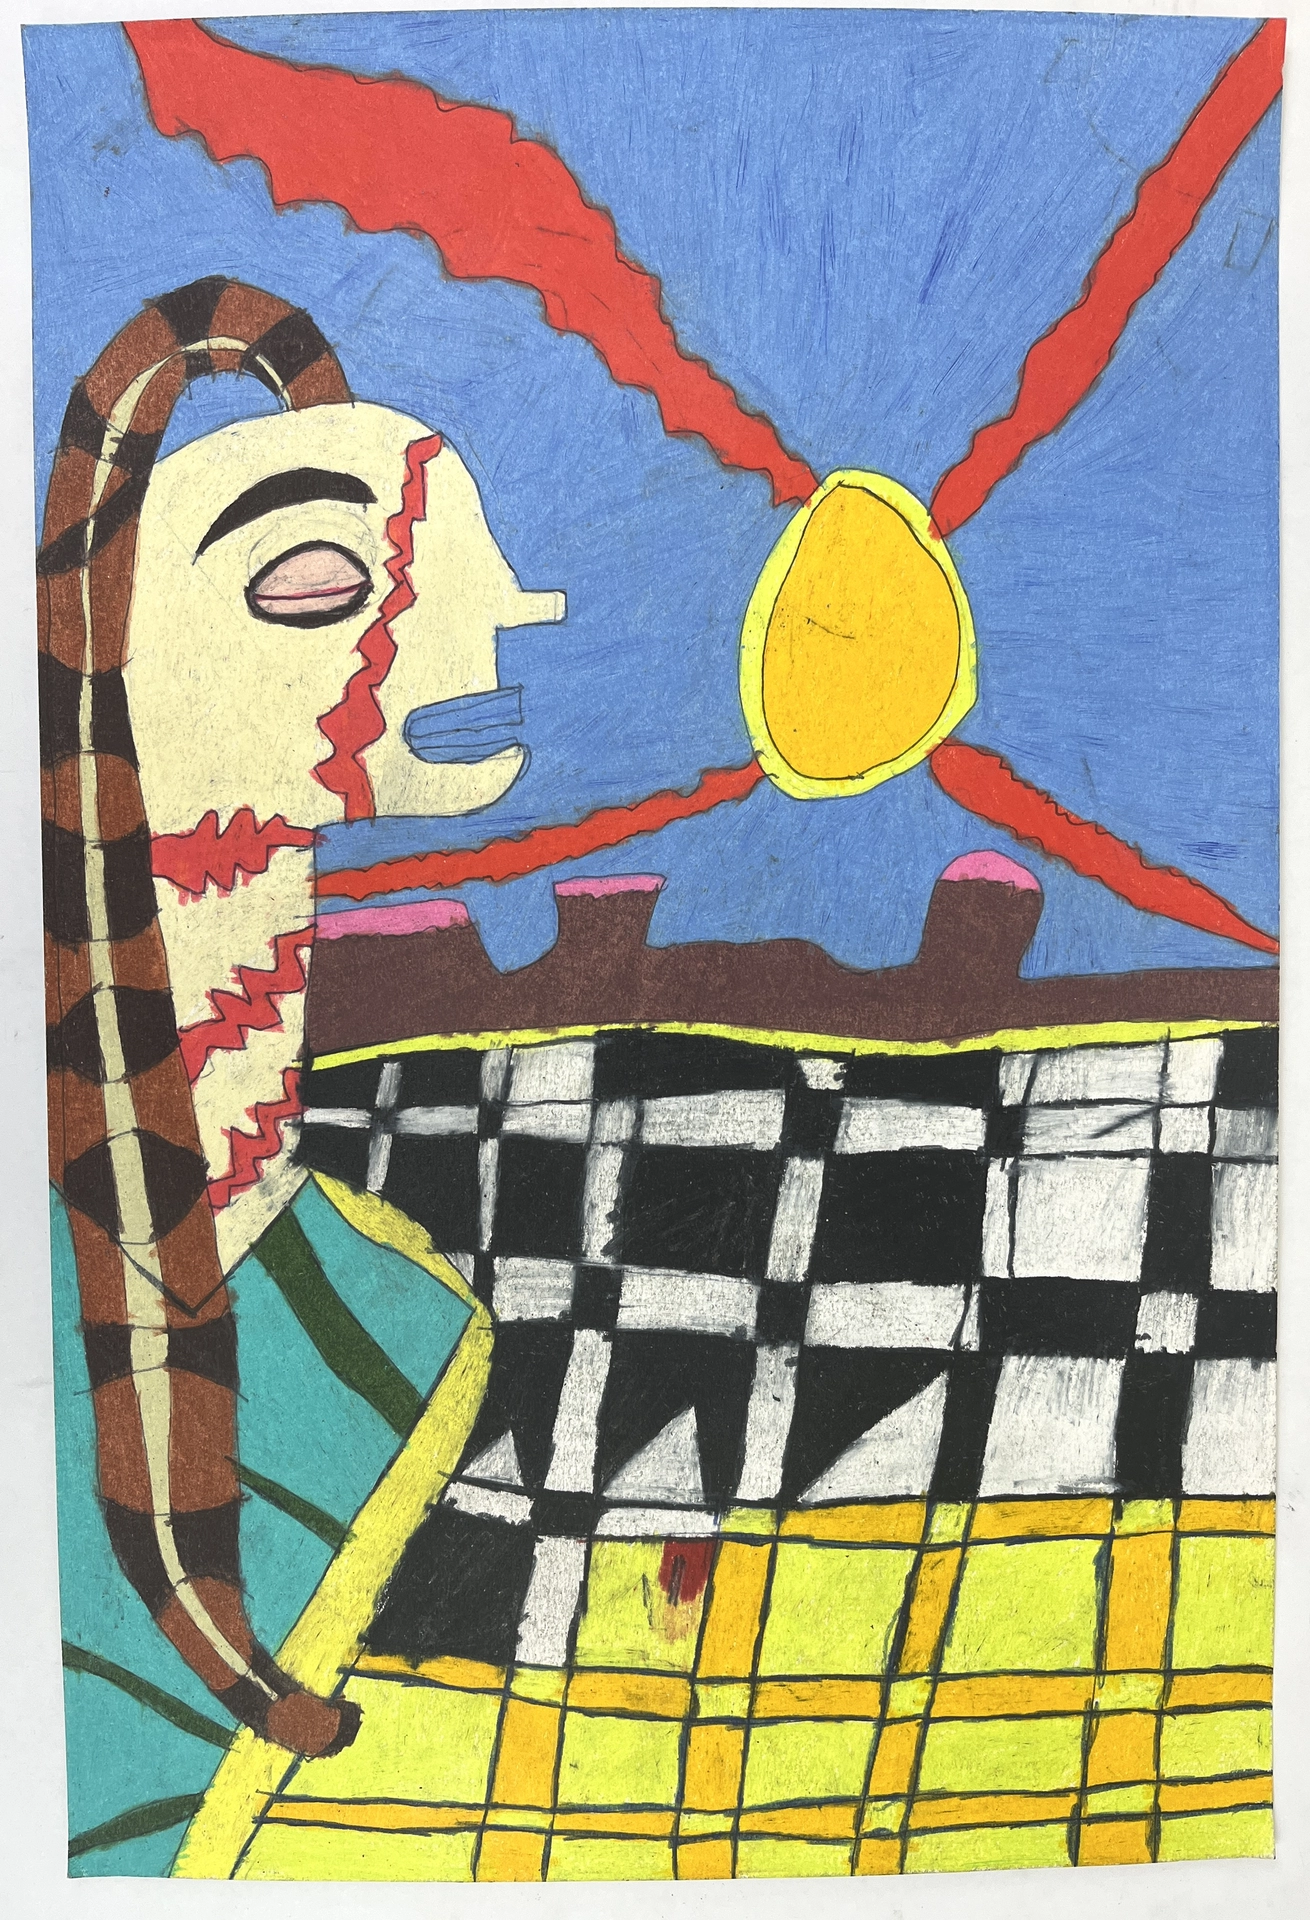 This image, stylized and rendered in smooth and saturated colored pencil, features the profile of a figure, eyes closed, mouth open, skin banded with crooked red markings, long snake-like hair, facing the rest of the scene: a broad, patterned plane, with mountains on the horizon, and a large yellow sun that radiates red bolts through a calm blue sky.